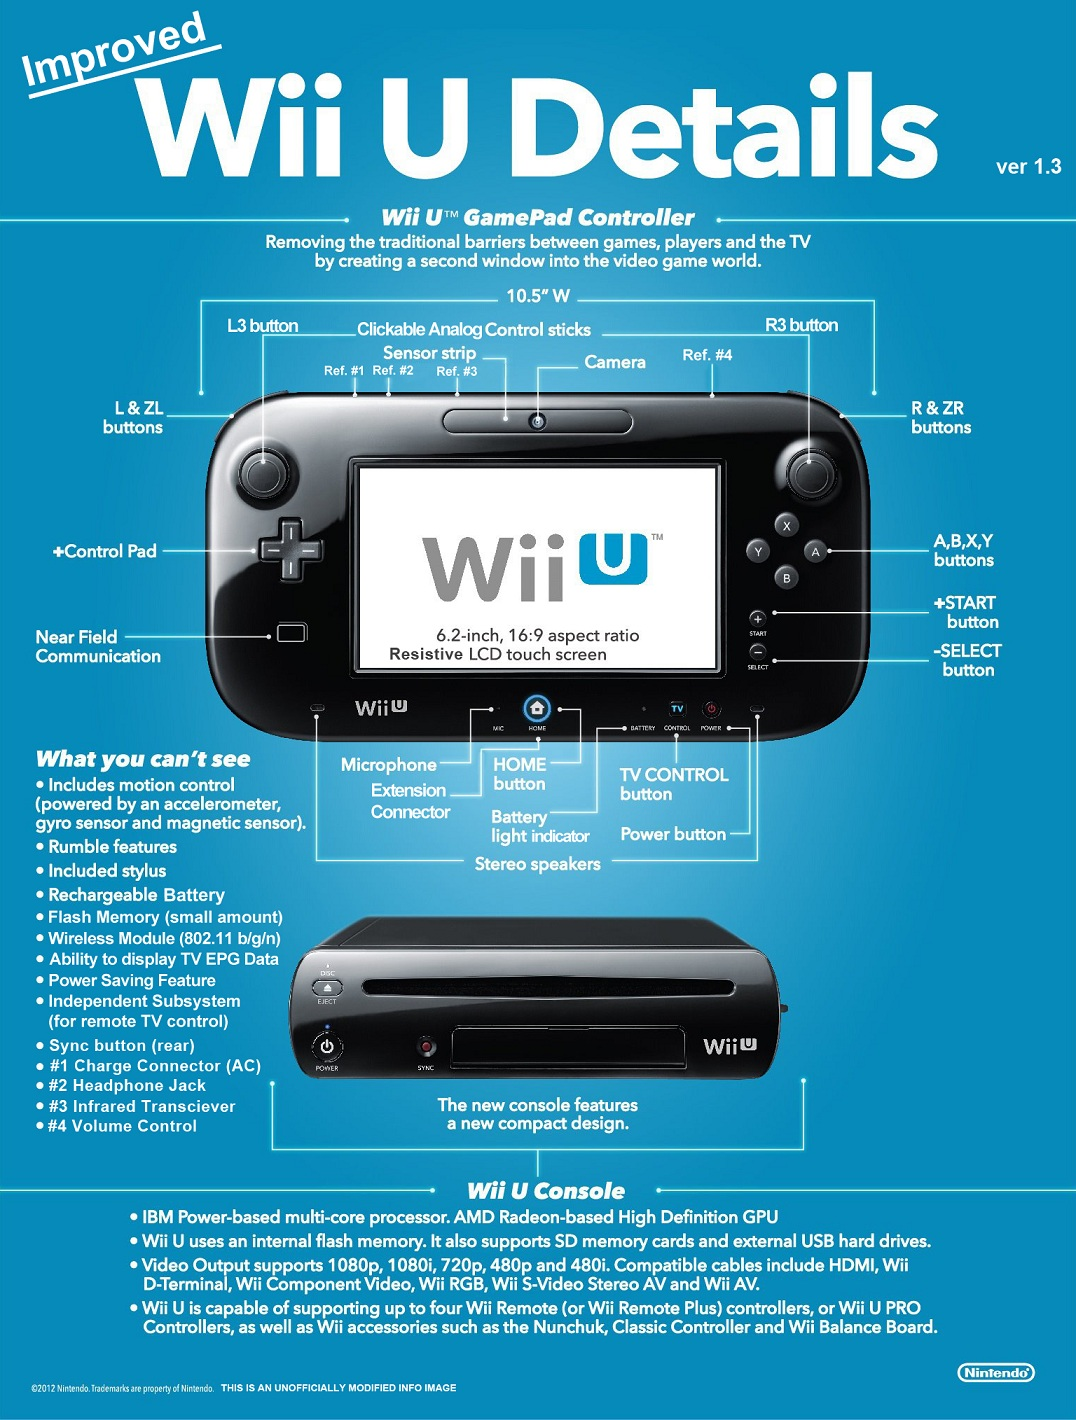 apodo Hacer la cena soborno Everything you need know about the Wii U | Ars Technica